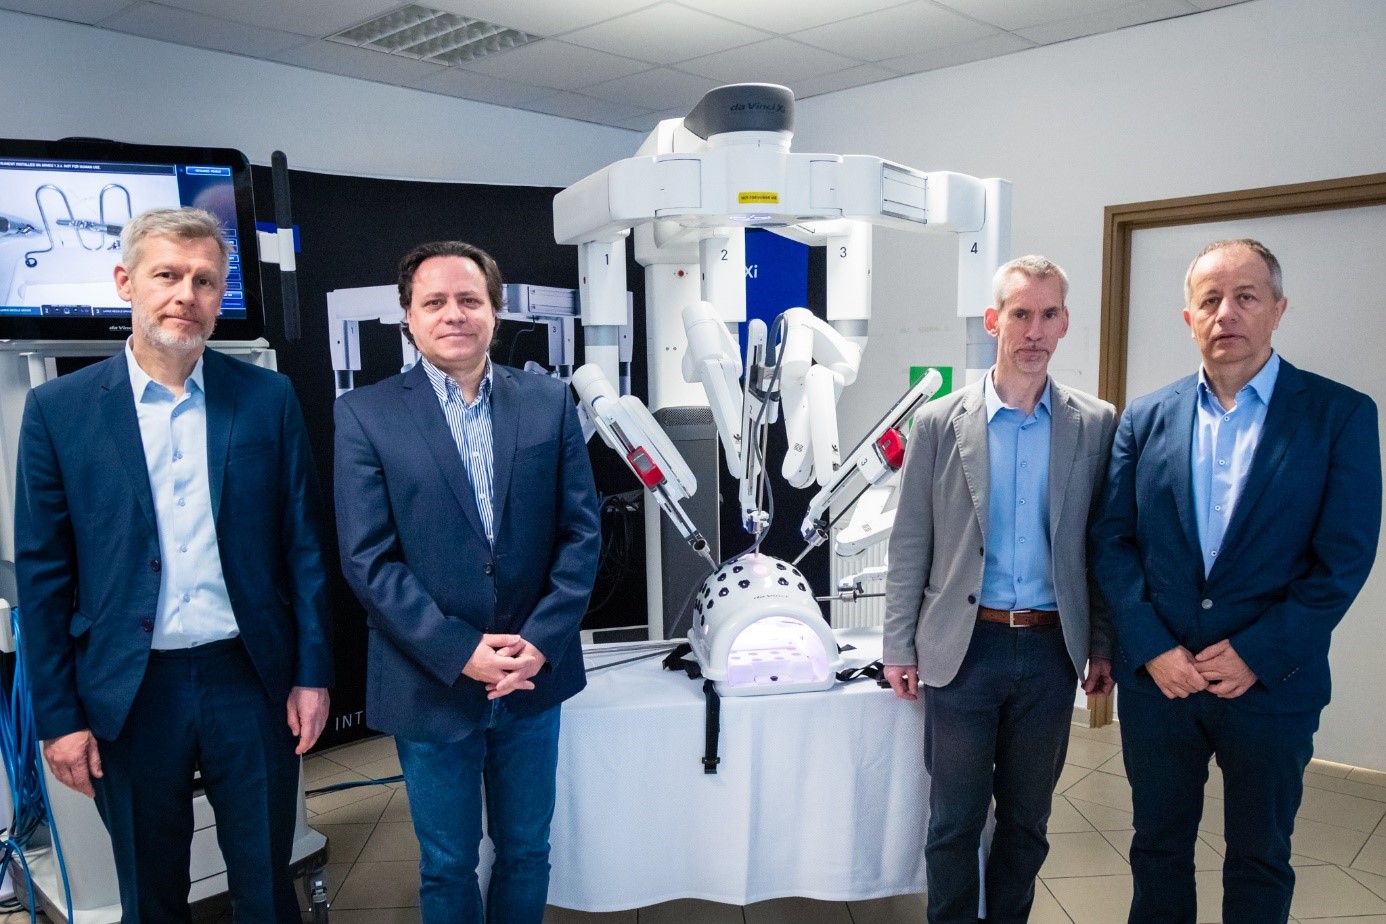 experts-from-the-petz-hospital-in-gyor-and-szechenyi-university-presented-the-surgical-robot (1).jpg